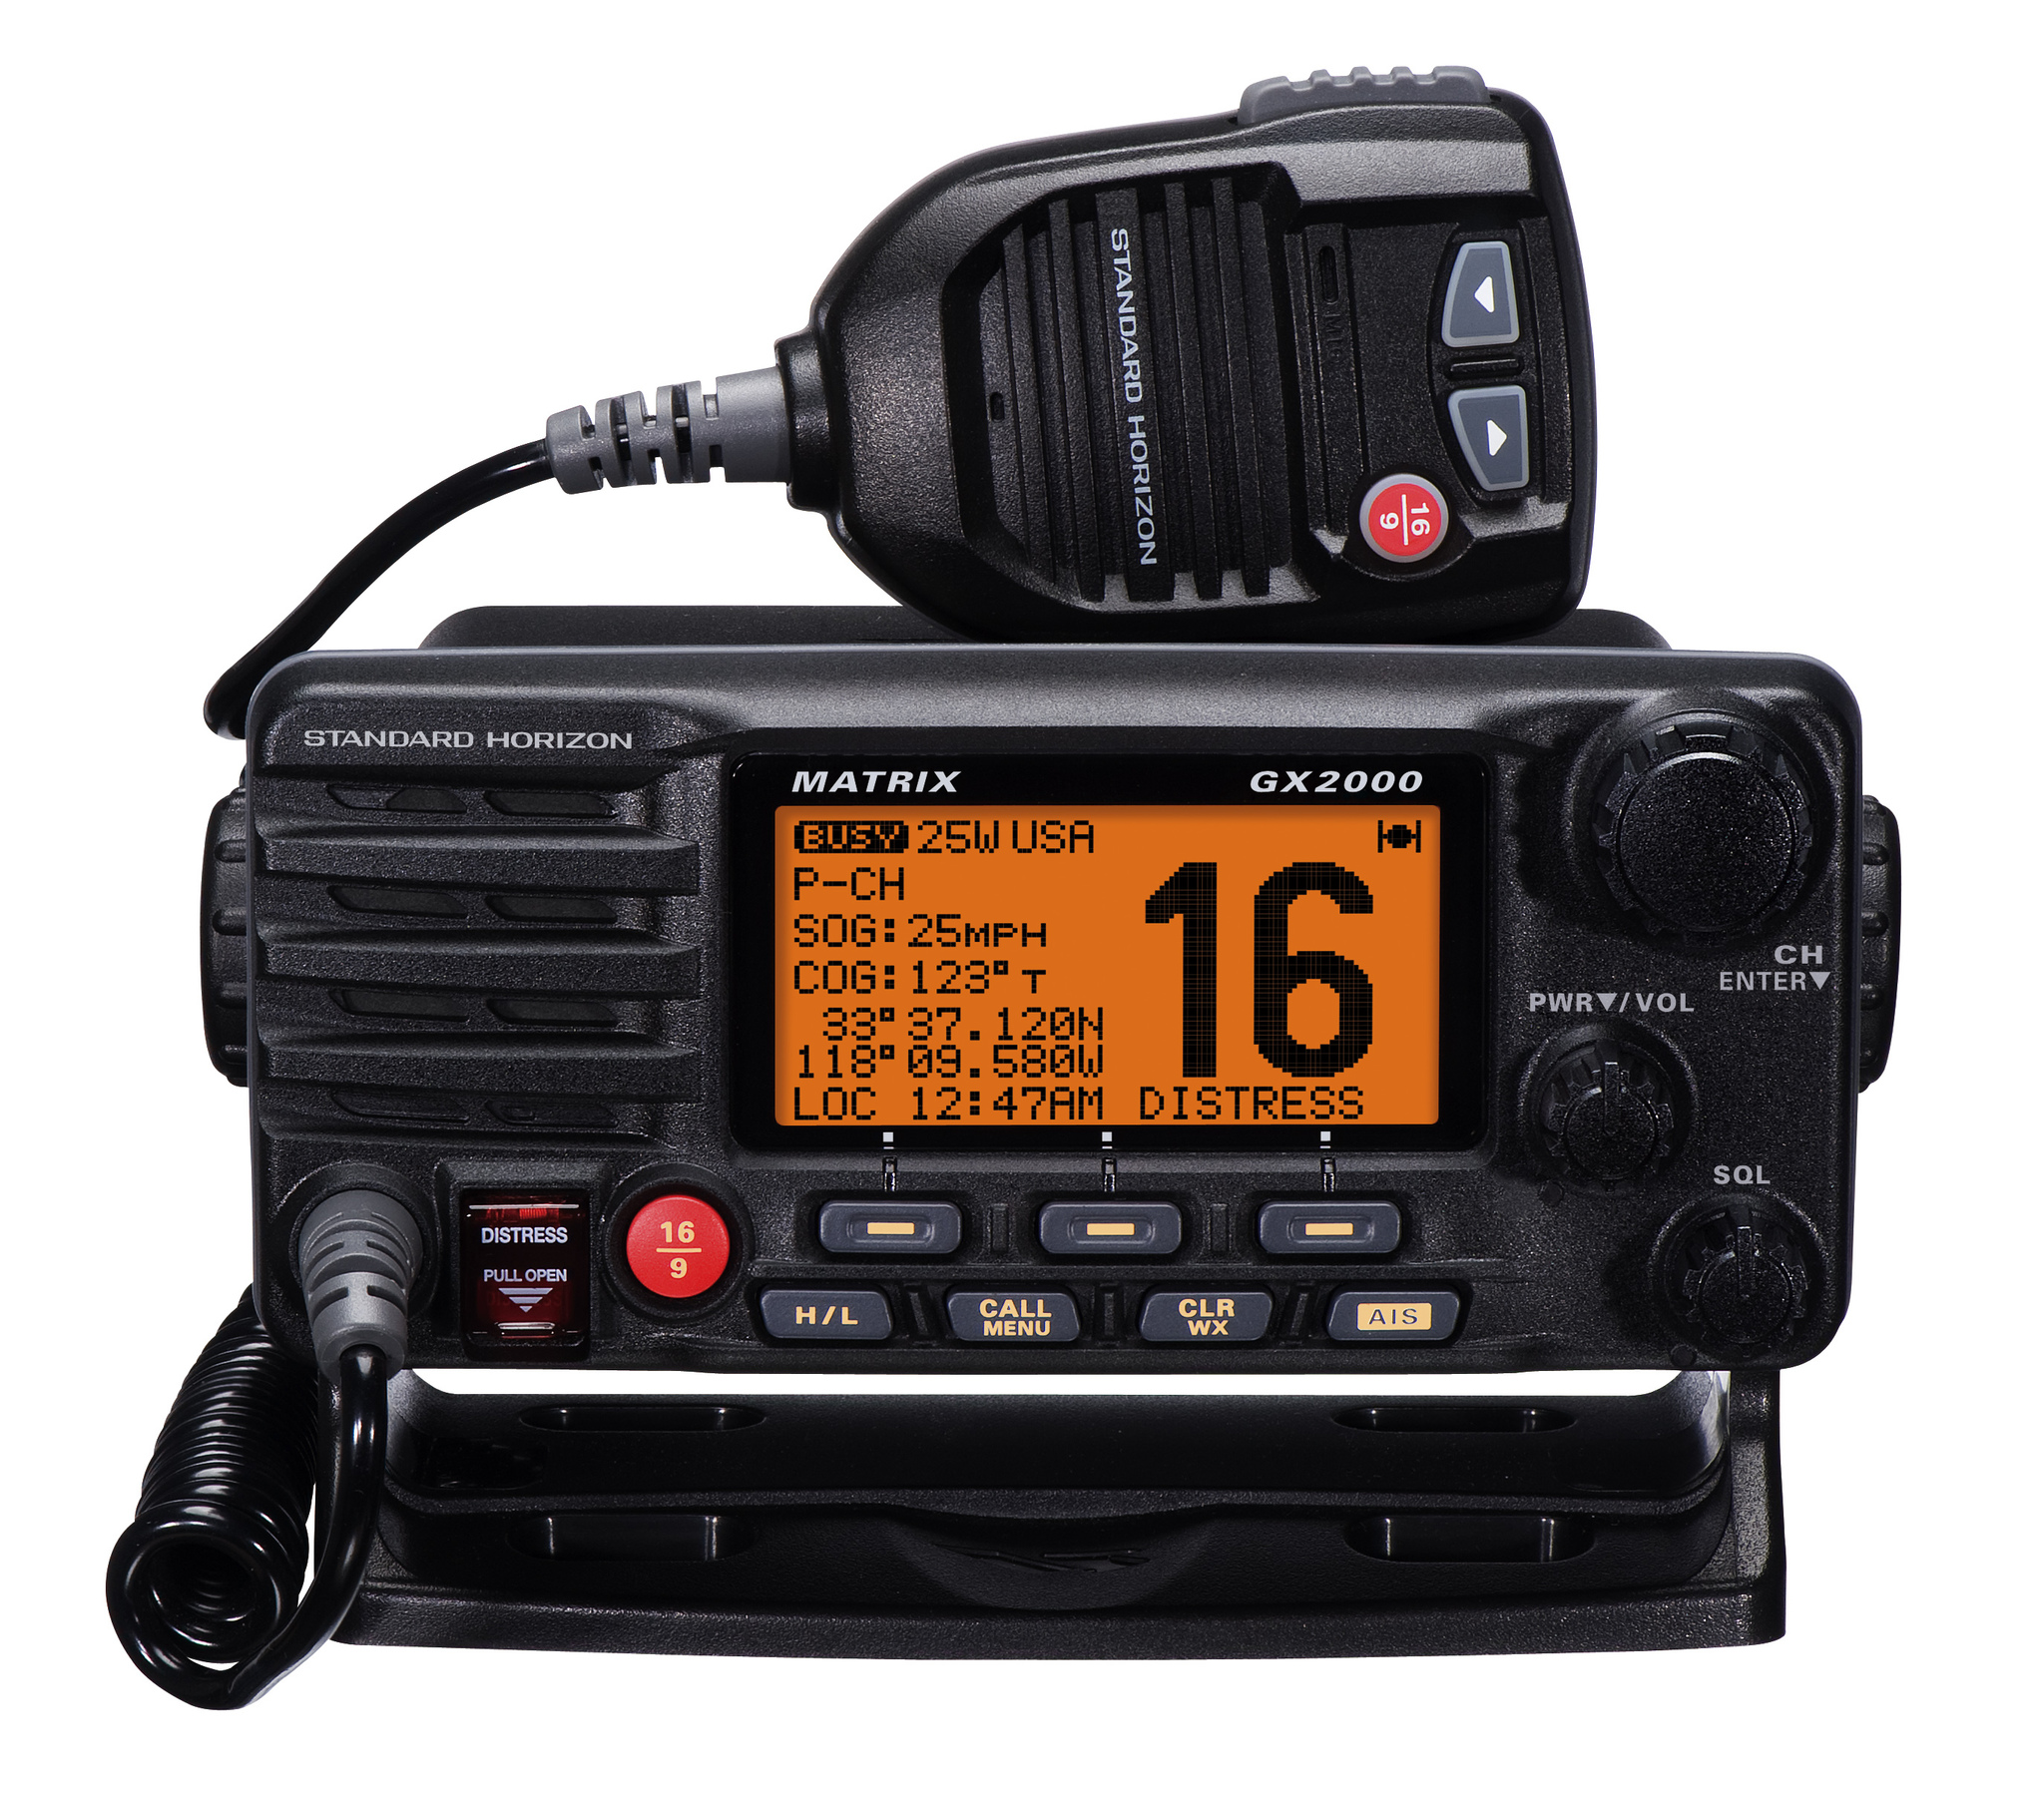  Standard Horizon - Stationary VHF with 25W, option for second microphone, hailer and external AIS